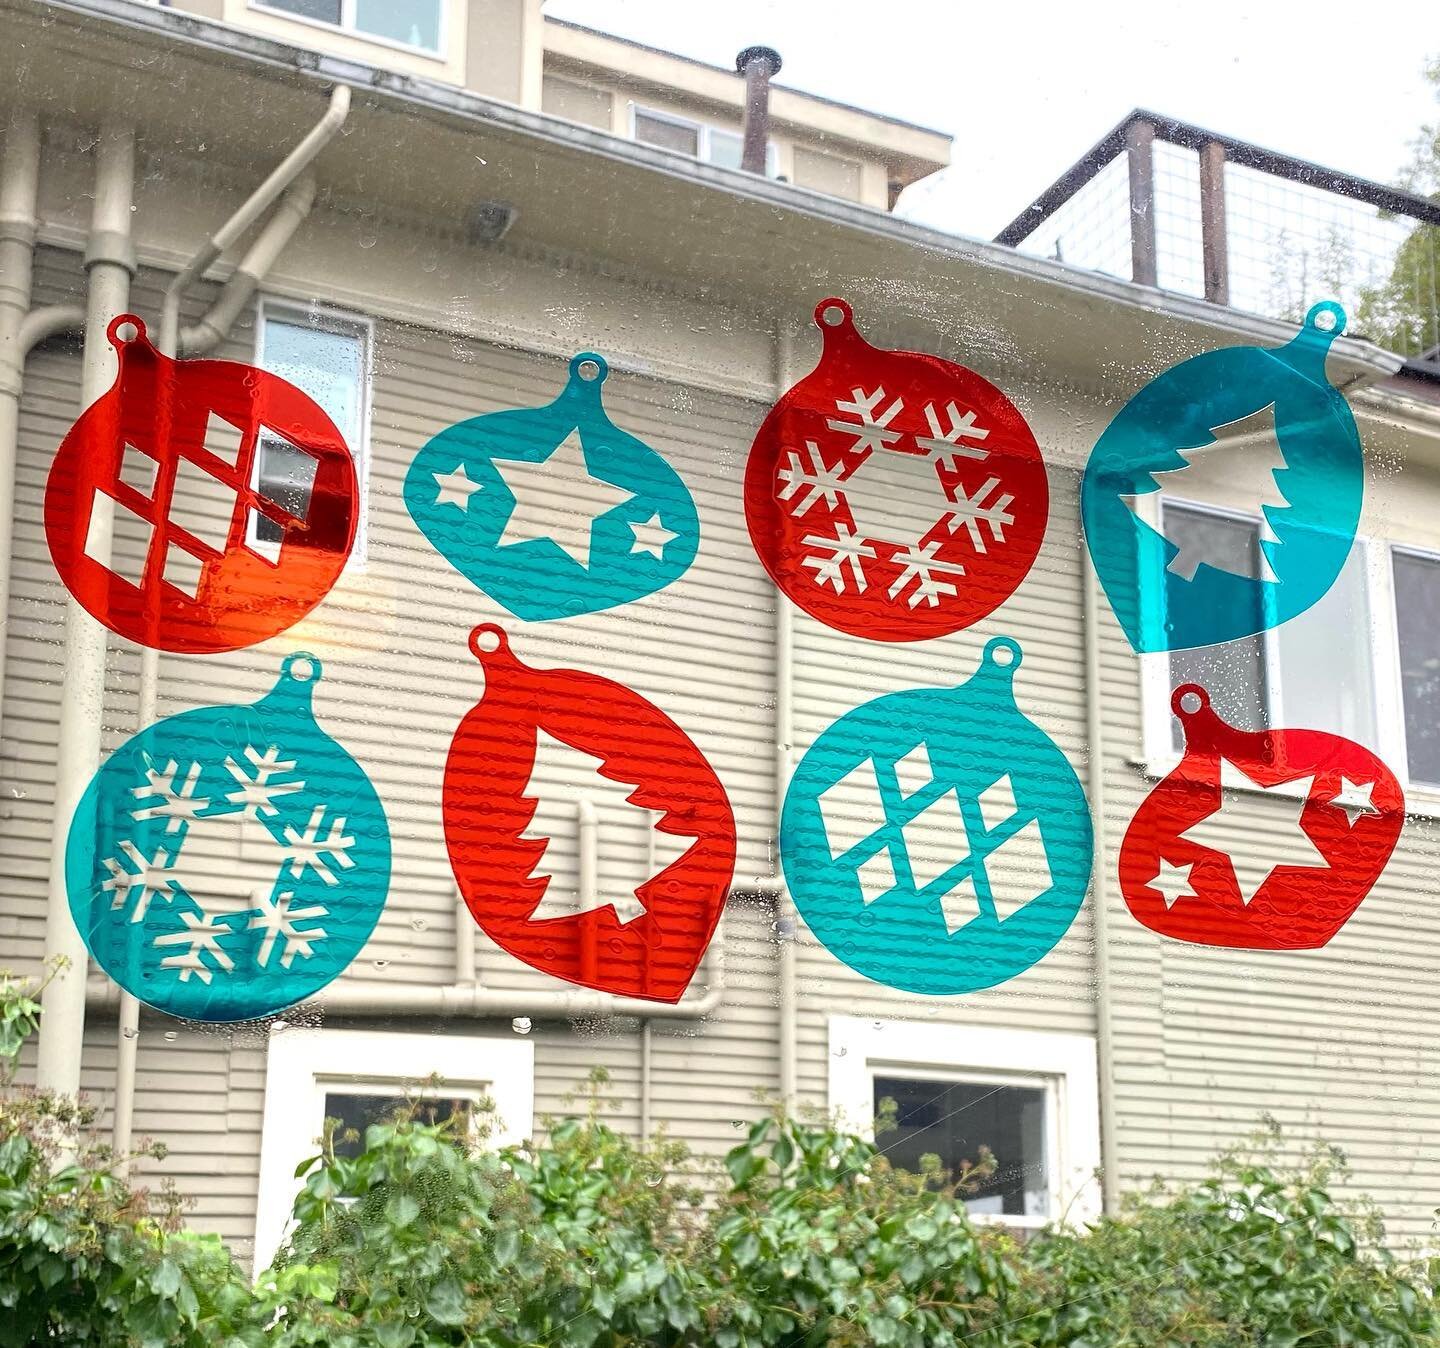 New Holiday Window Clings! Renter friendly way to decorate for the holidays! 🎁❄️🎄🎅 Check them out on the Etsy store through the bio link!